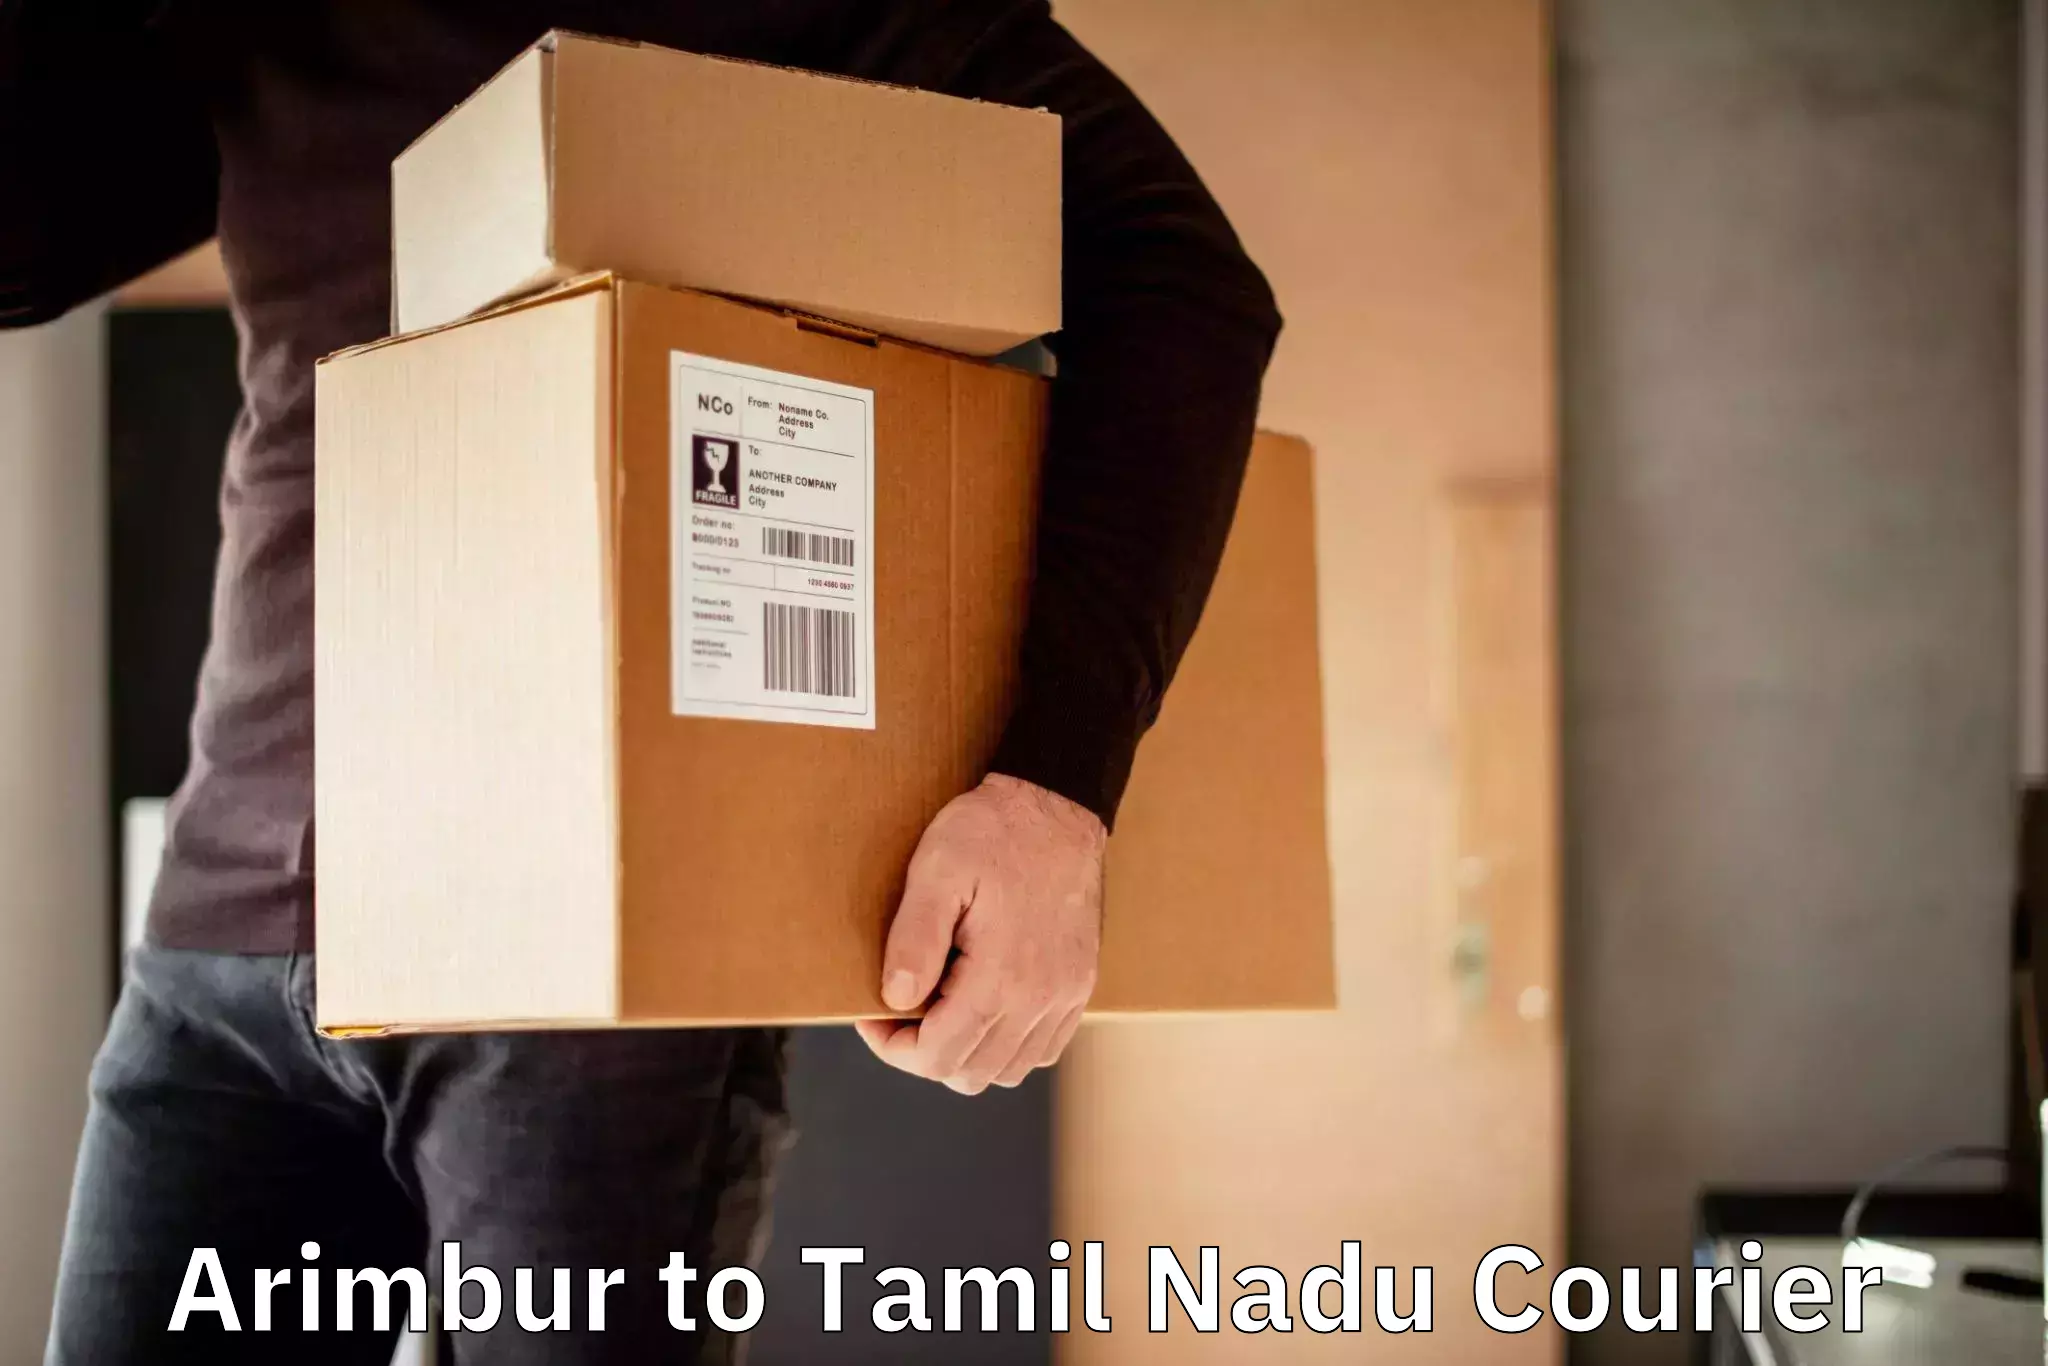 End-to-end delivery Arimbur to Vellore Institute of Technology